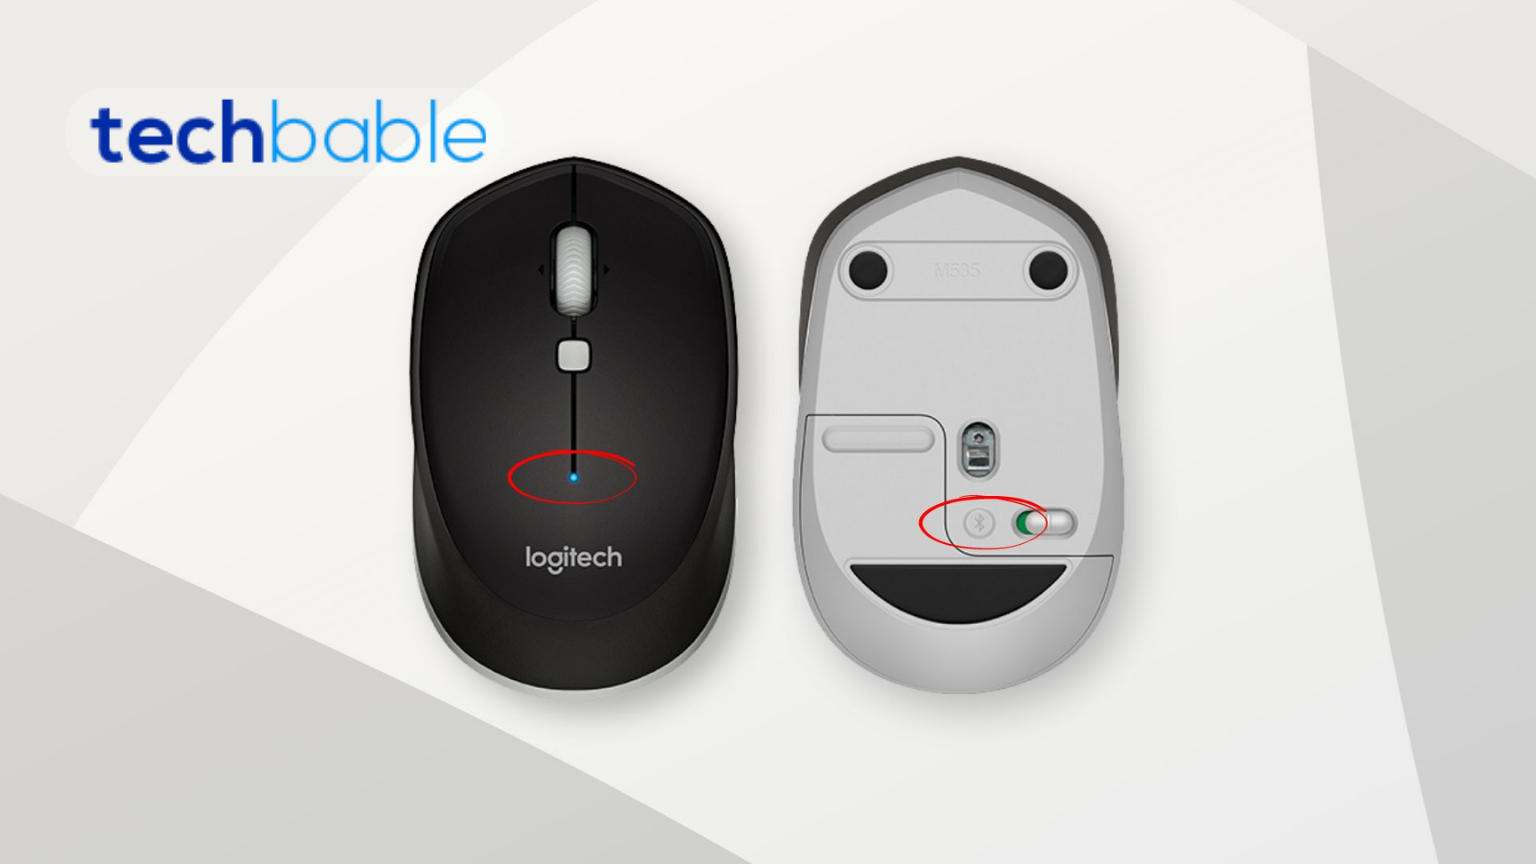 Where is the connect button on the Logitech mouse